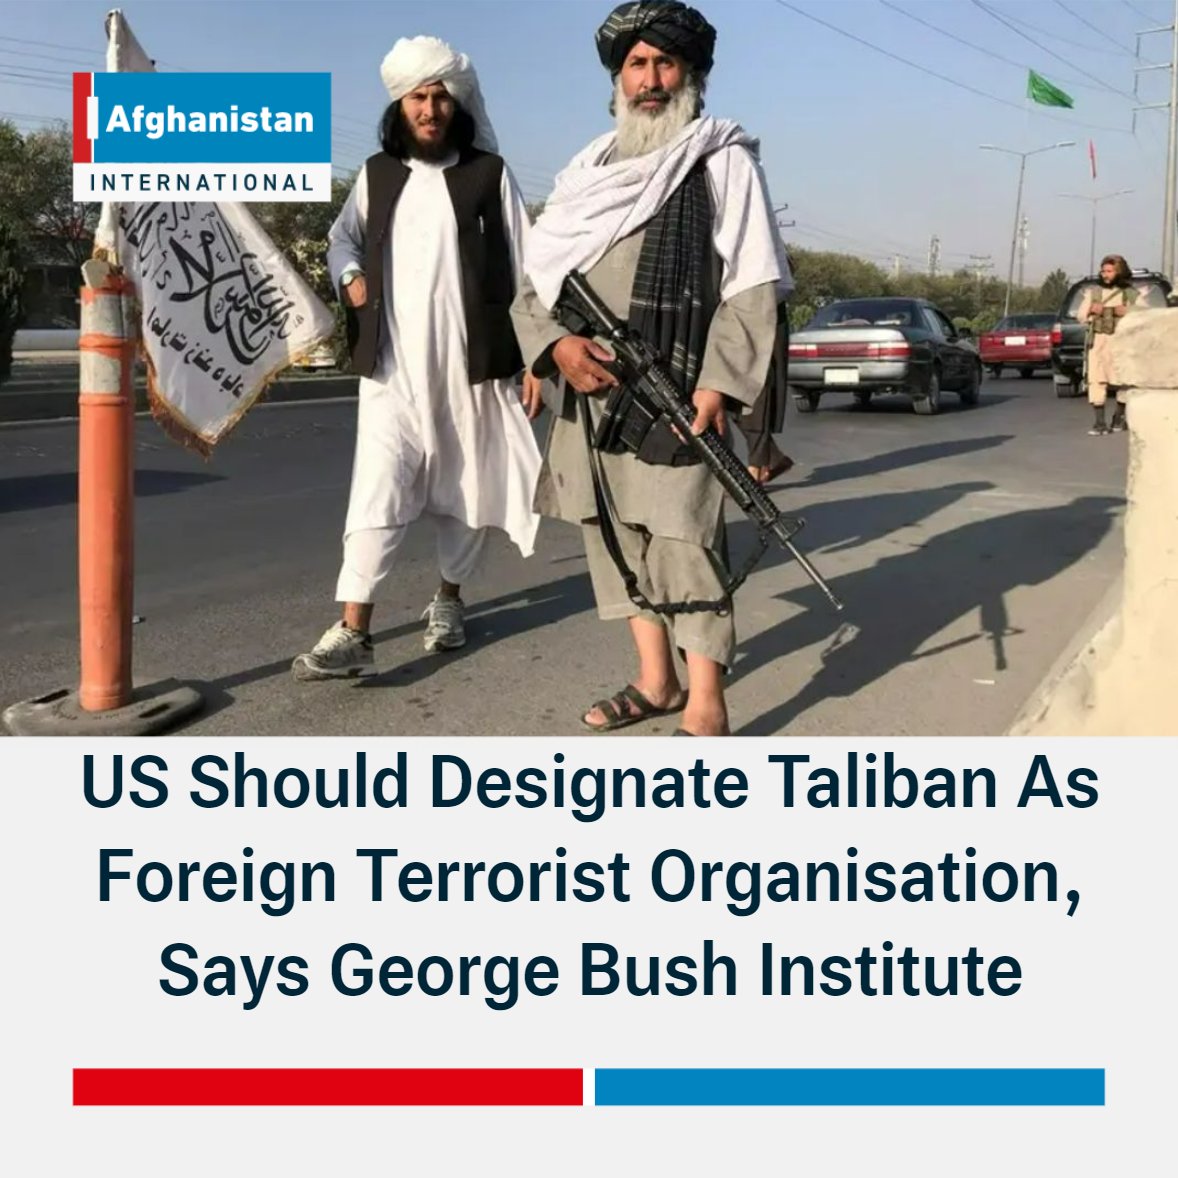 The George Bush Institute, in a report referring to the Taliban's ties with terrorist groups and continued violation of women's rights, has urged the United States and the international community to officially designate the Taliban as a Foreign Terrorist Organisation.